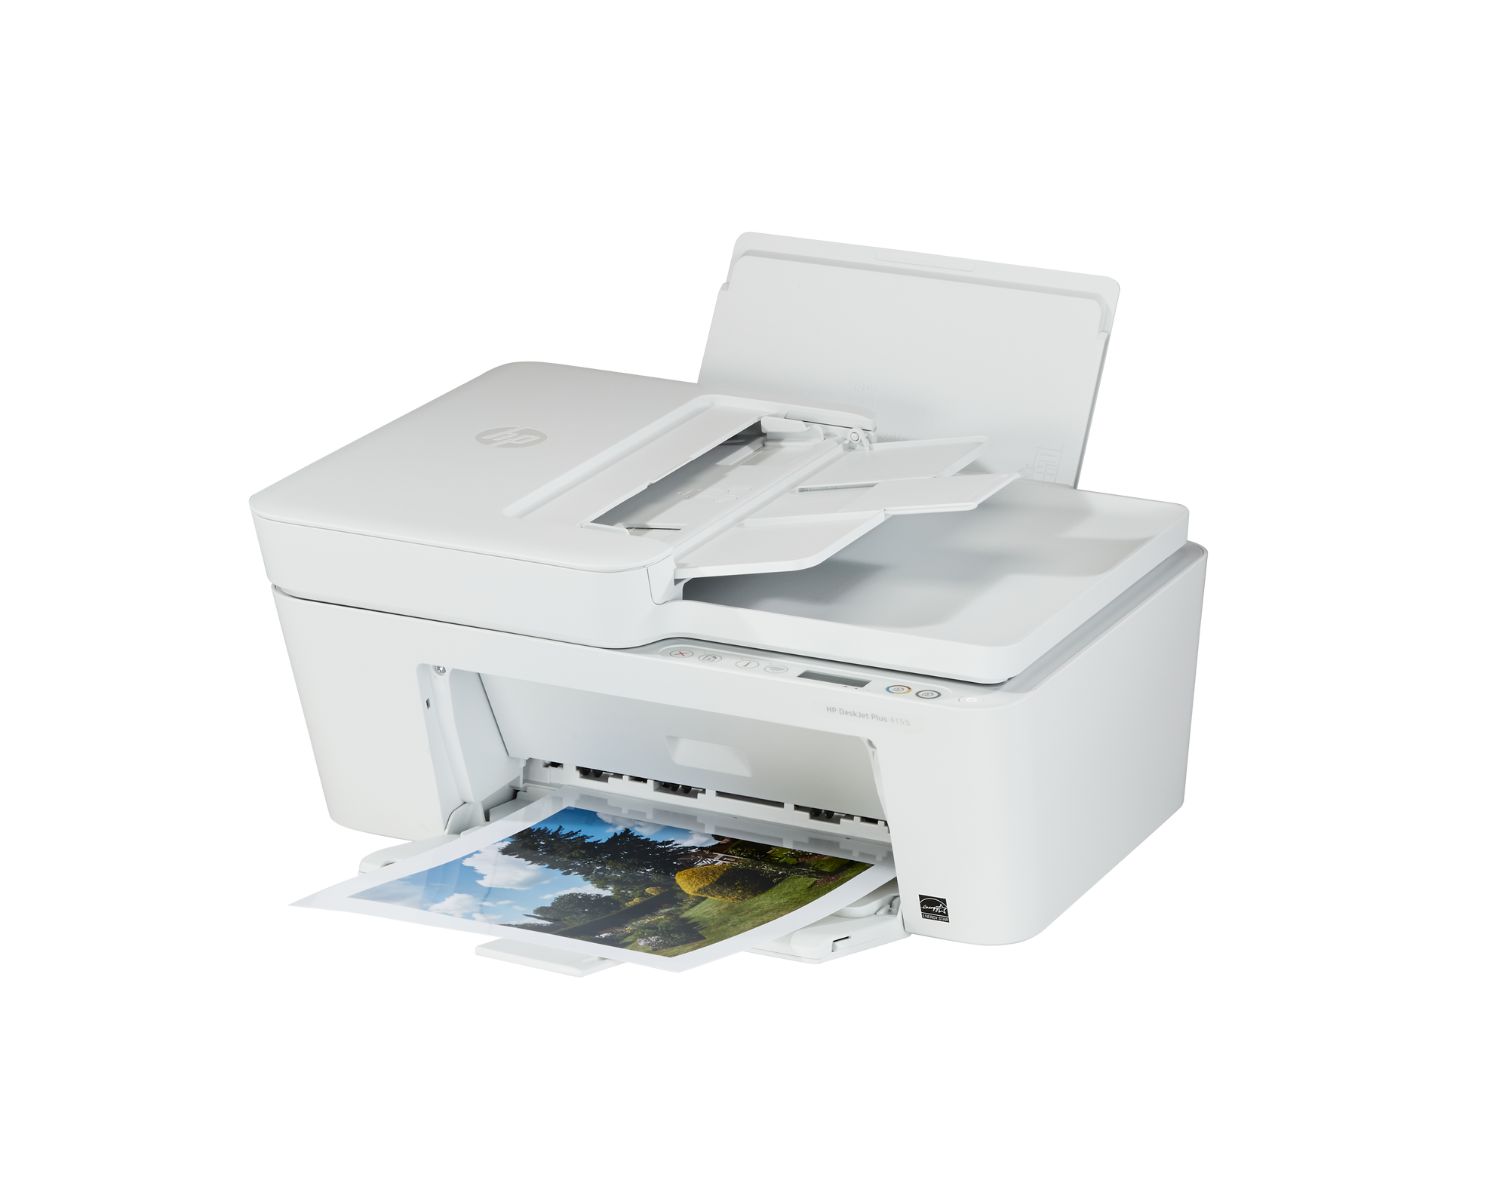 How To Connect HP DeskJet 4155 Printer To Wi-Fi